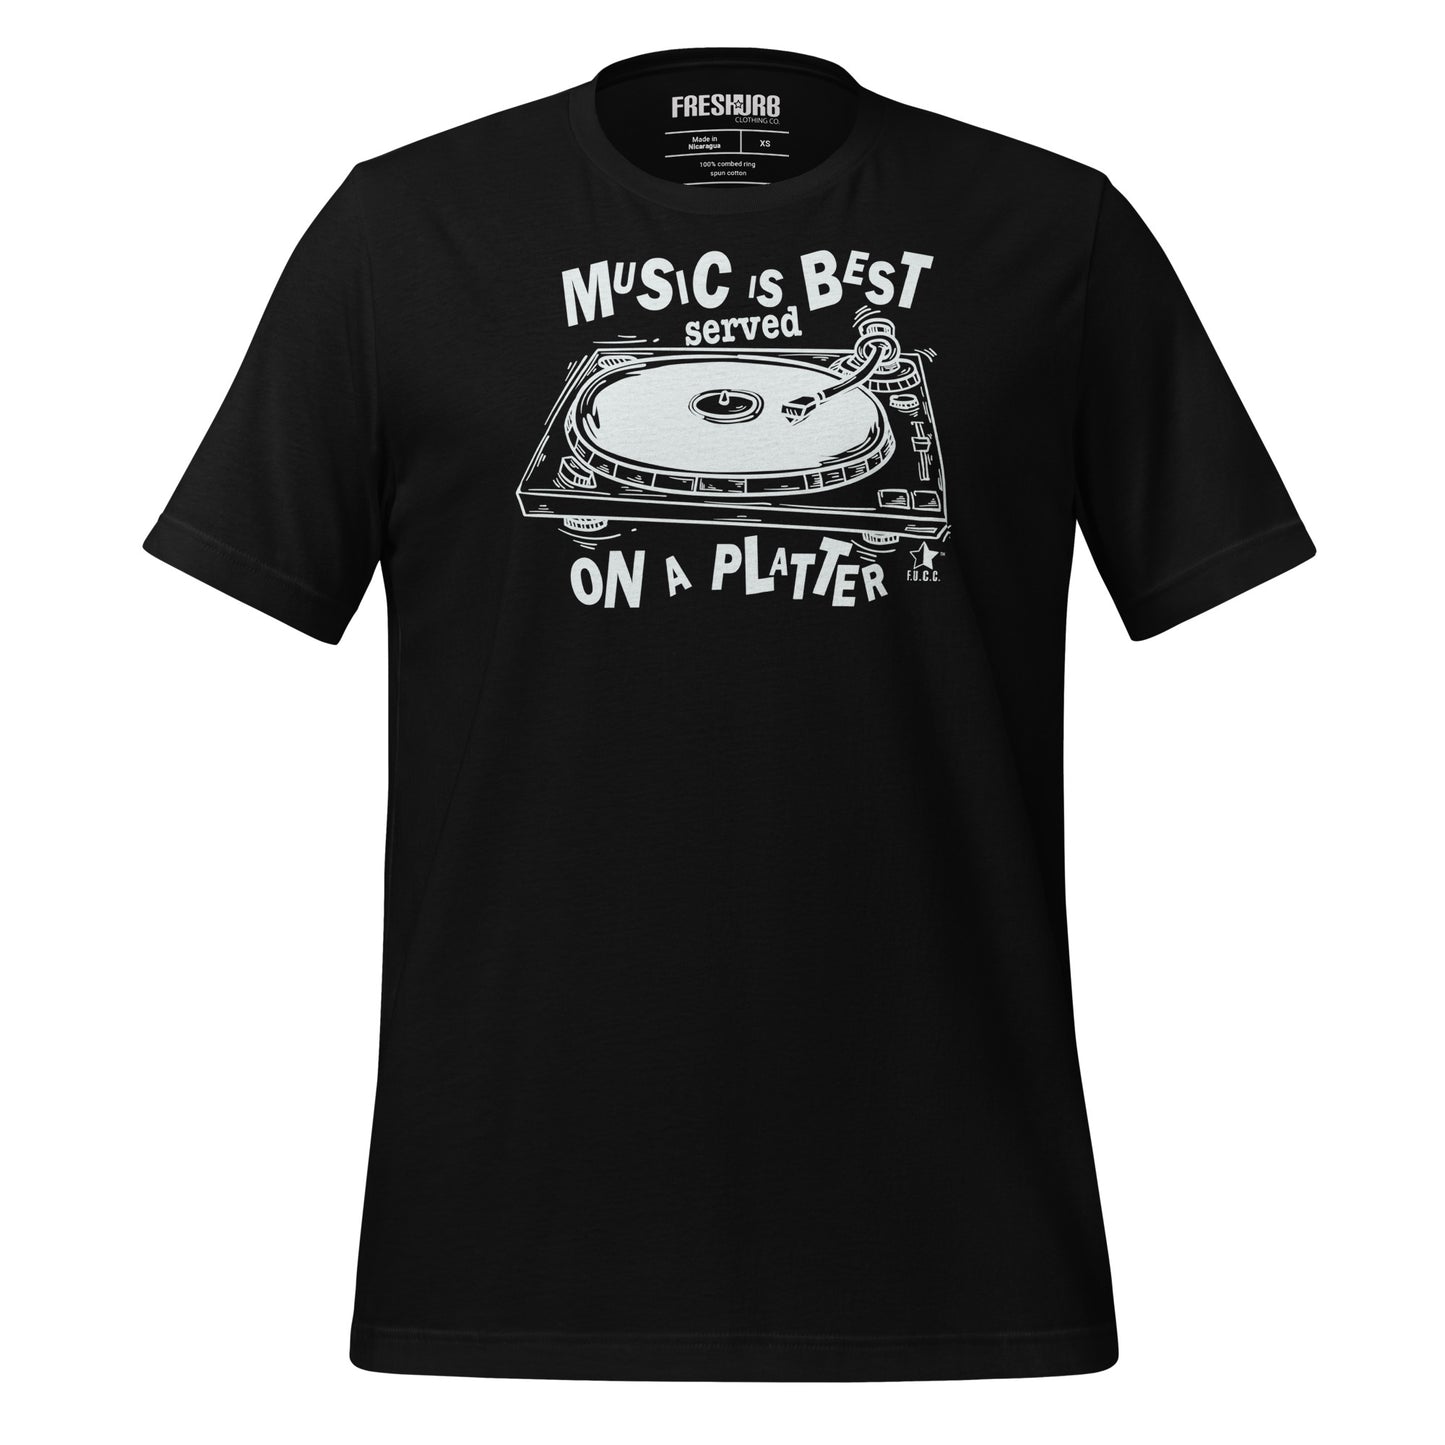 MUSIC IS BEST SERVED | Modern Fitted Tee